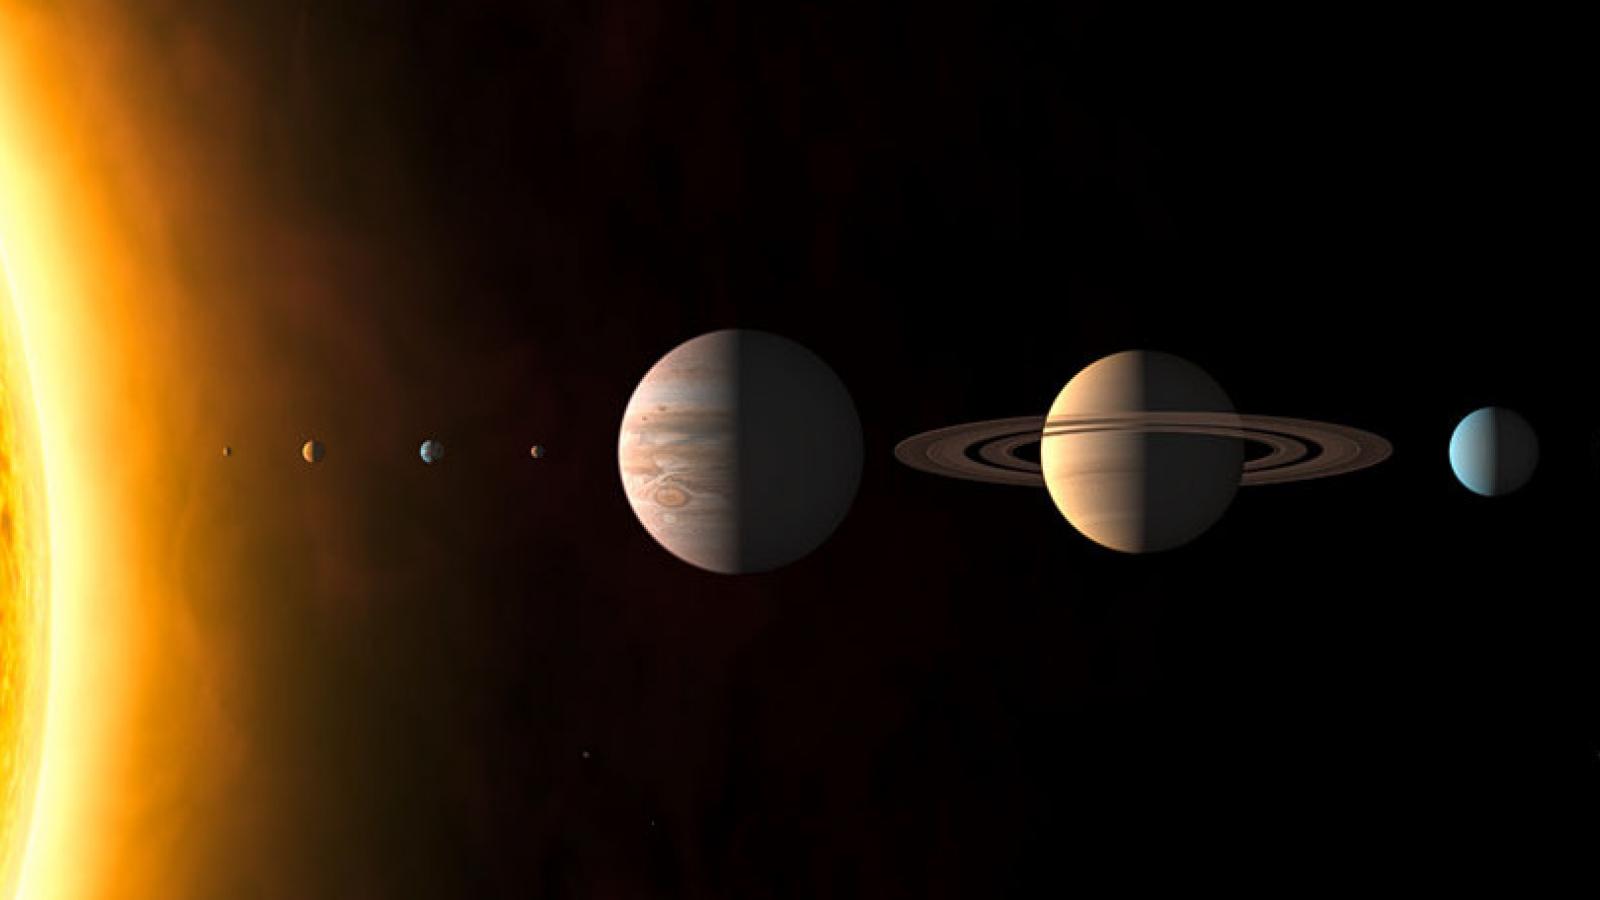 Ast1140 - Planets & The Solar System